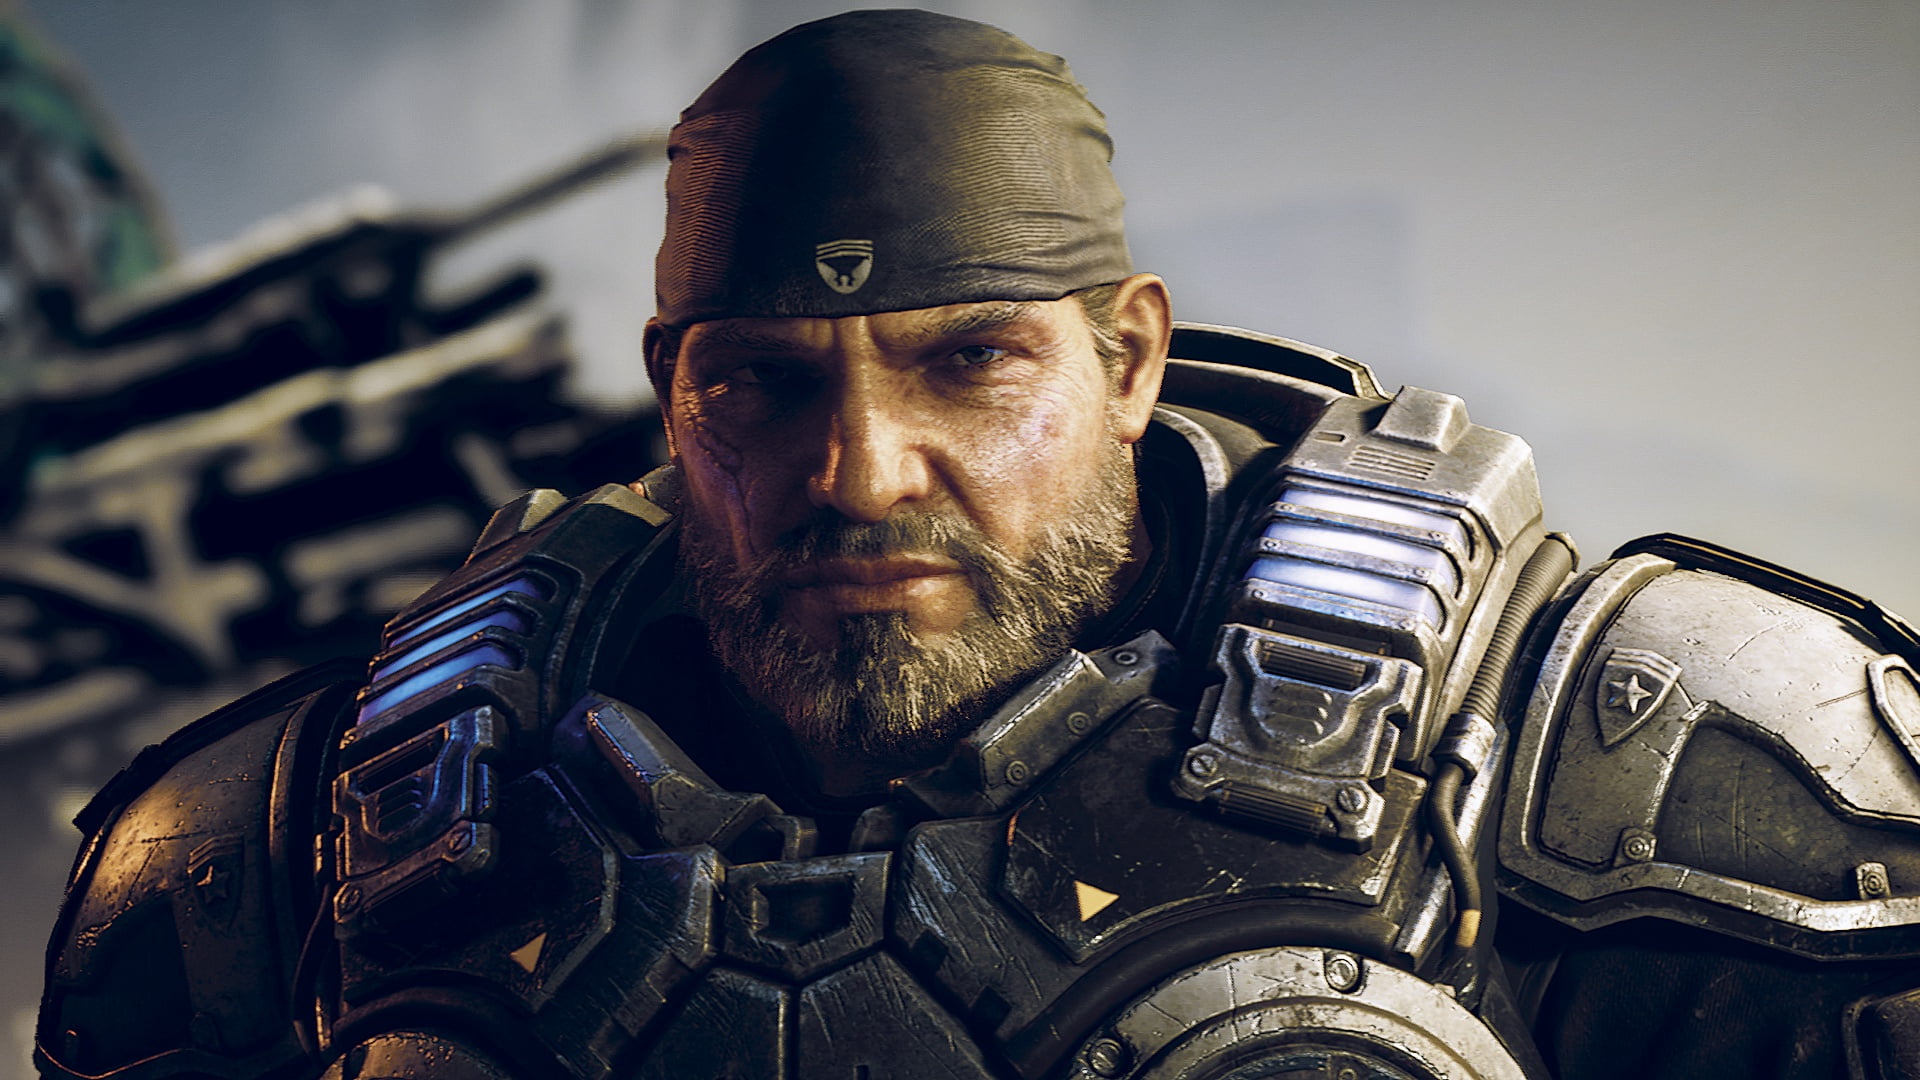 Gears 5 Operation 6 Patch Notes Revealed Before Patch Drops - MP1st